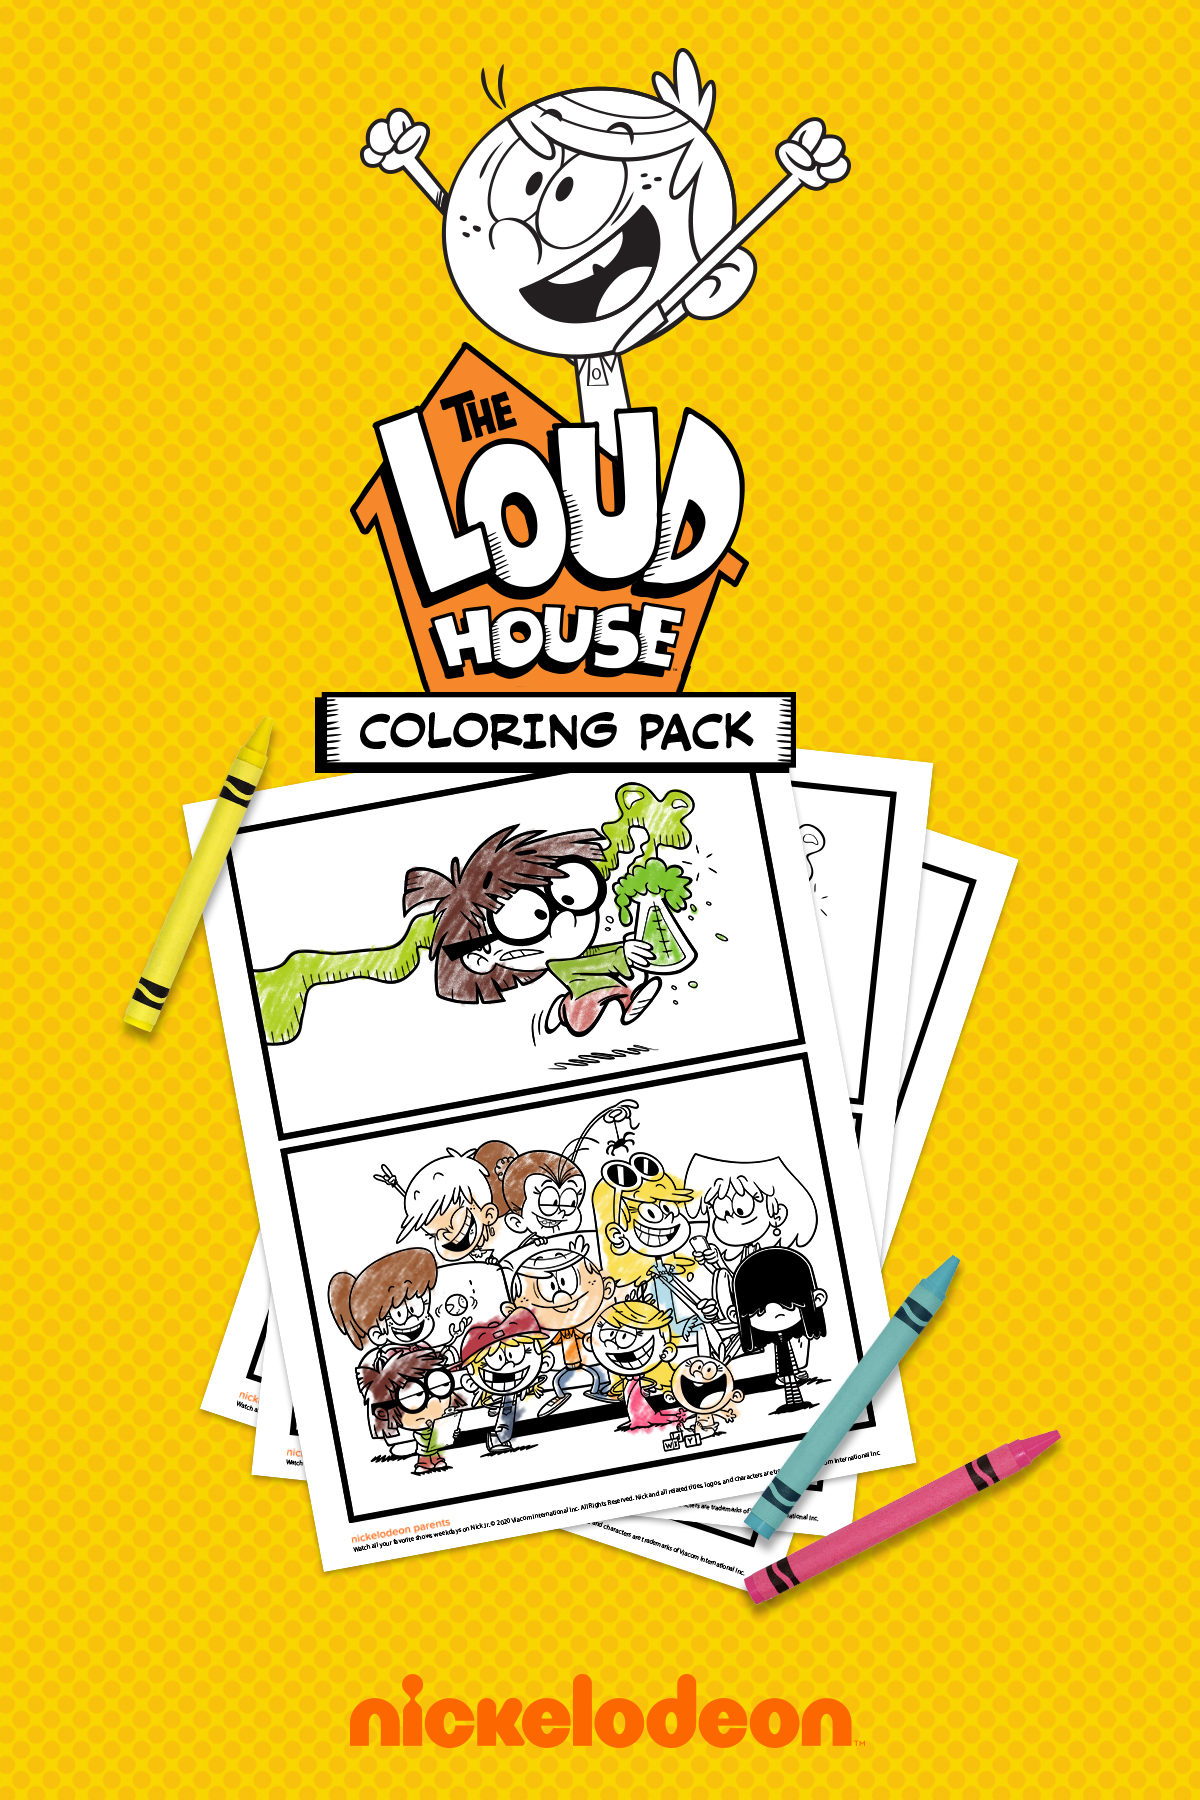 57 Nickelodeon Coloring Pages Online  Best Free